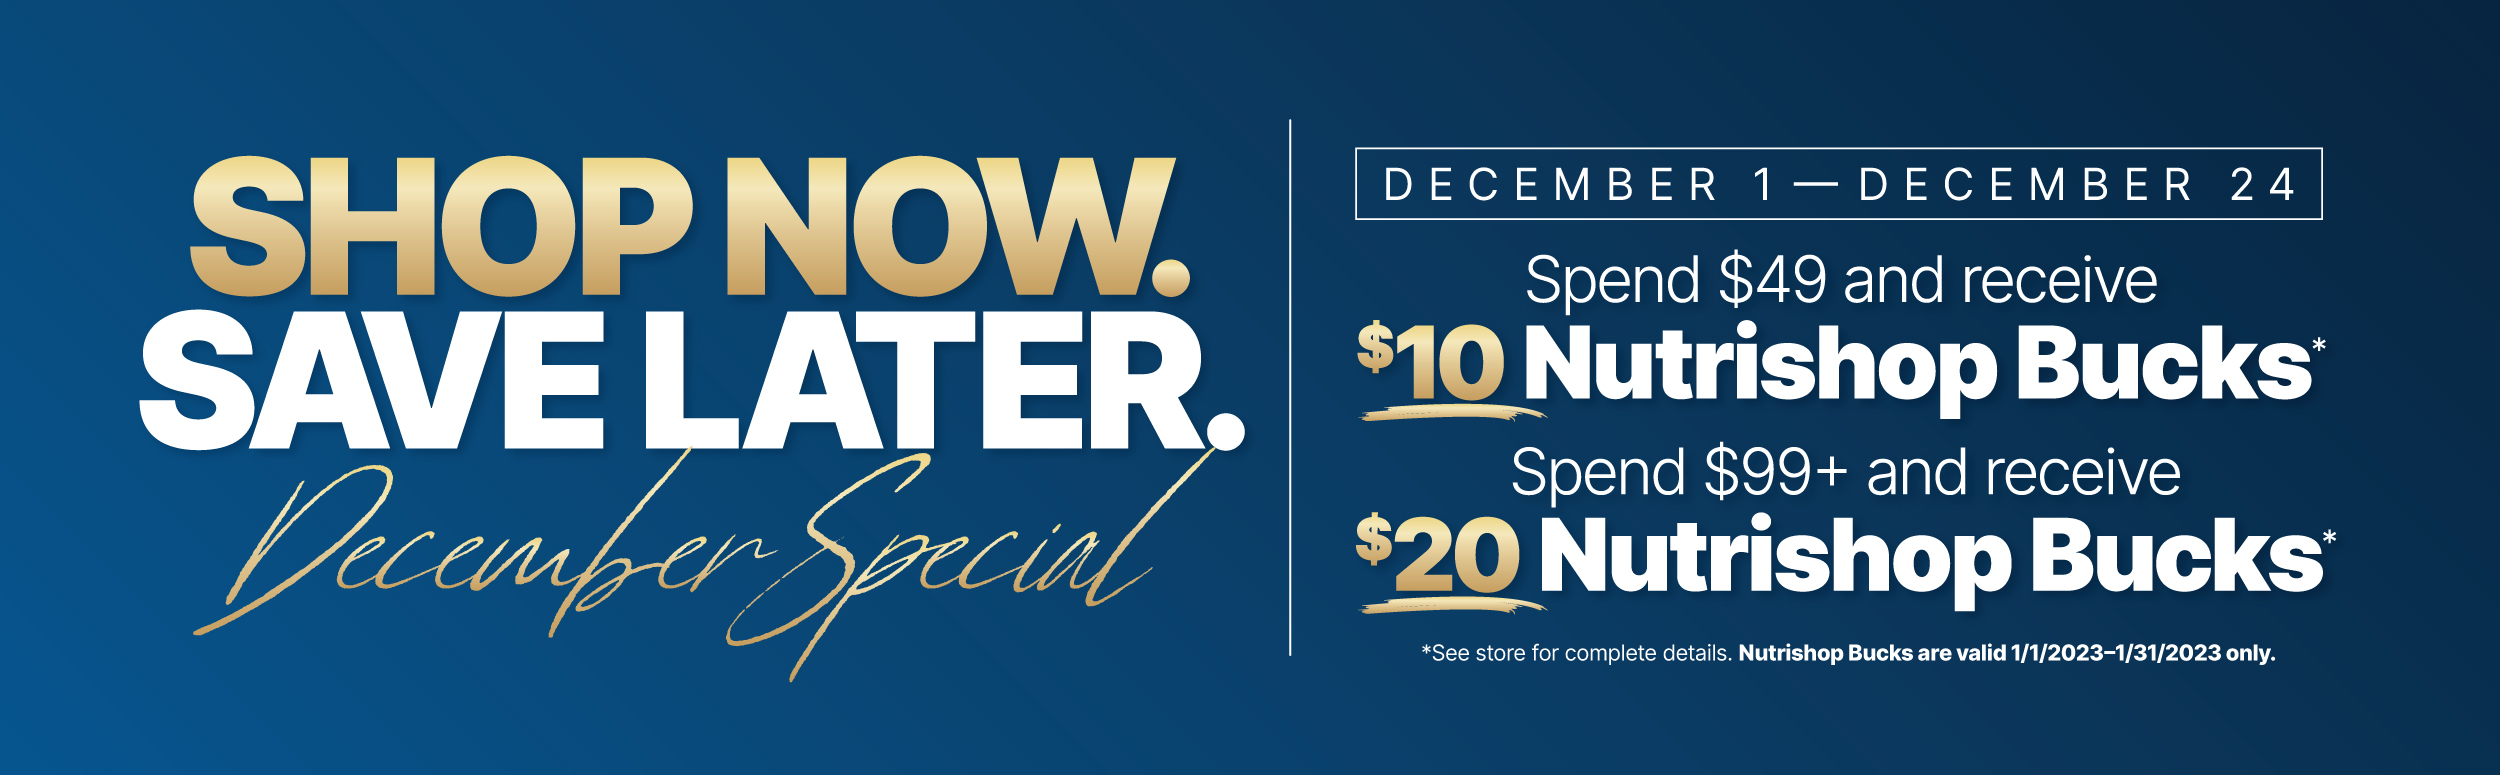 Shop now, save later. December Special from December 1st to the 24th. Spent $49 and receive $10 Nutrishop bucks or spend $99 or more and receive $20 Nutrishop bucks.